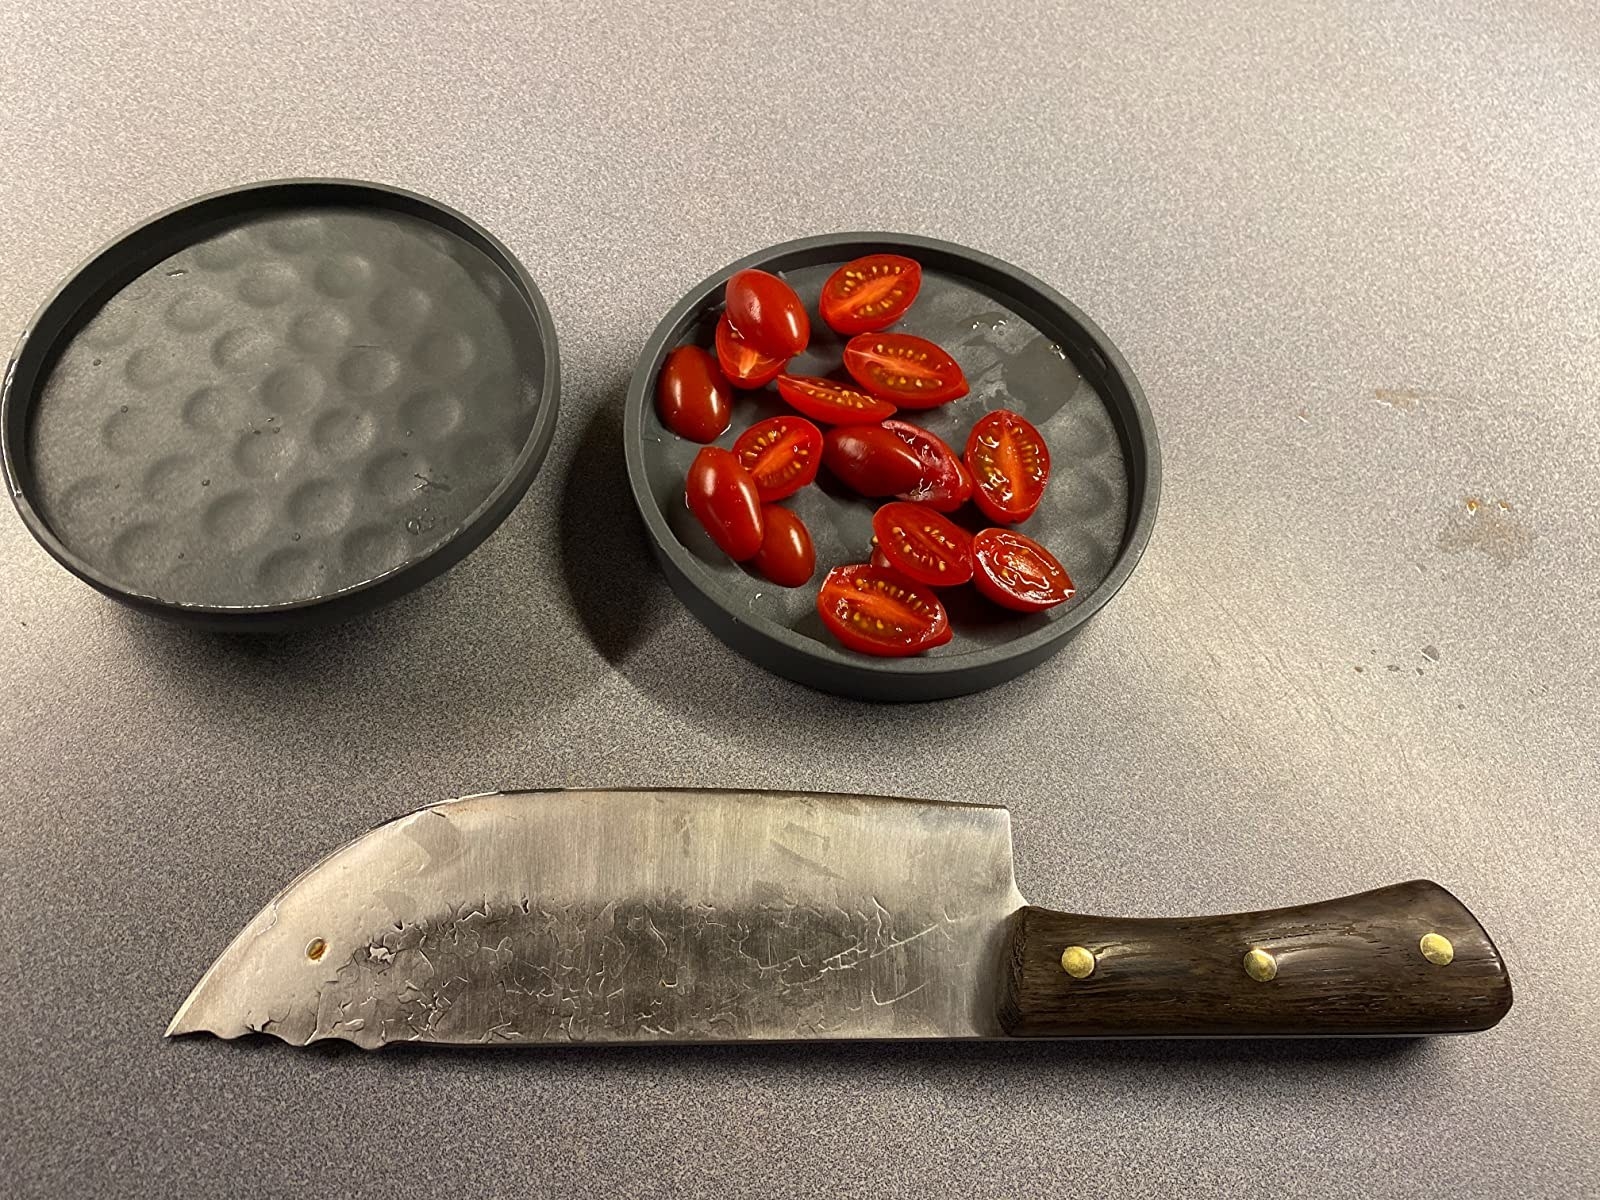 Reviewer image of slicing tool with tomatoes in it and a knife next to it